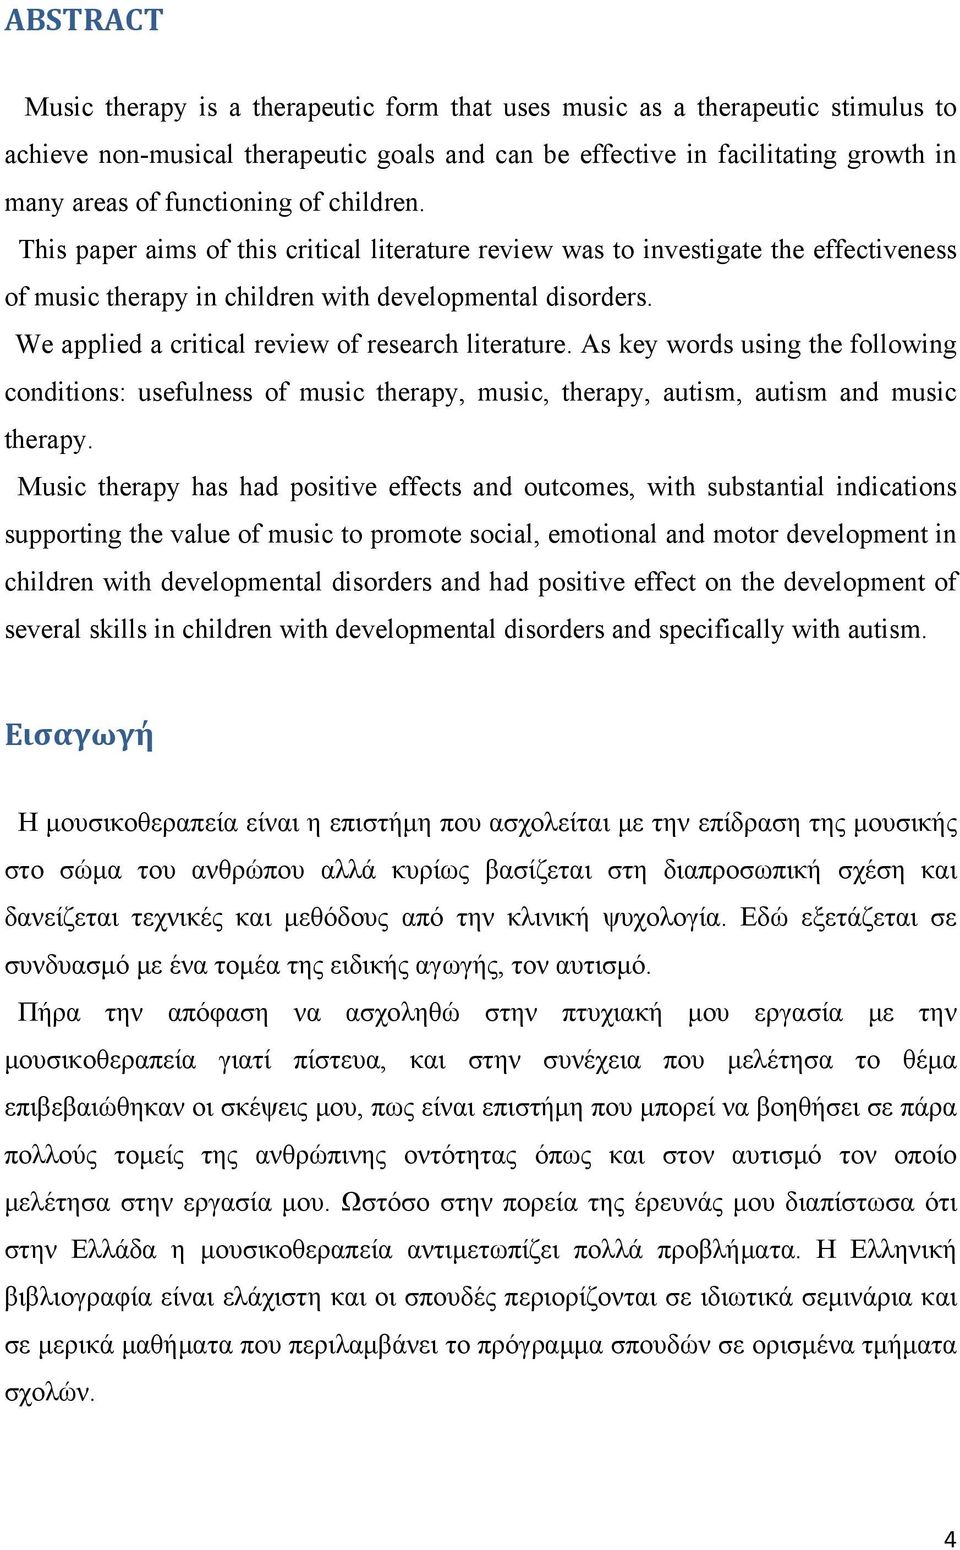 We applied a critical review of research literature. As key words using the following conditions: usefulness of music therapy, music, therapy, autism, autism and music therapy.